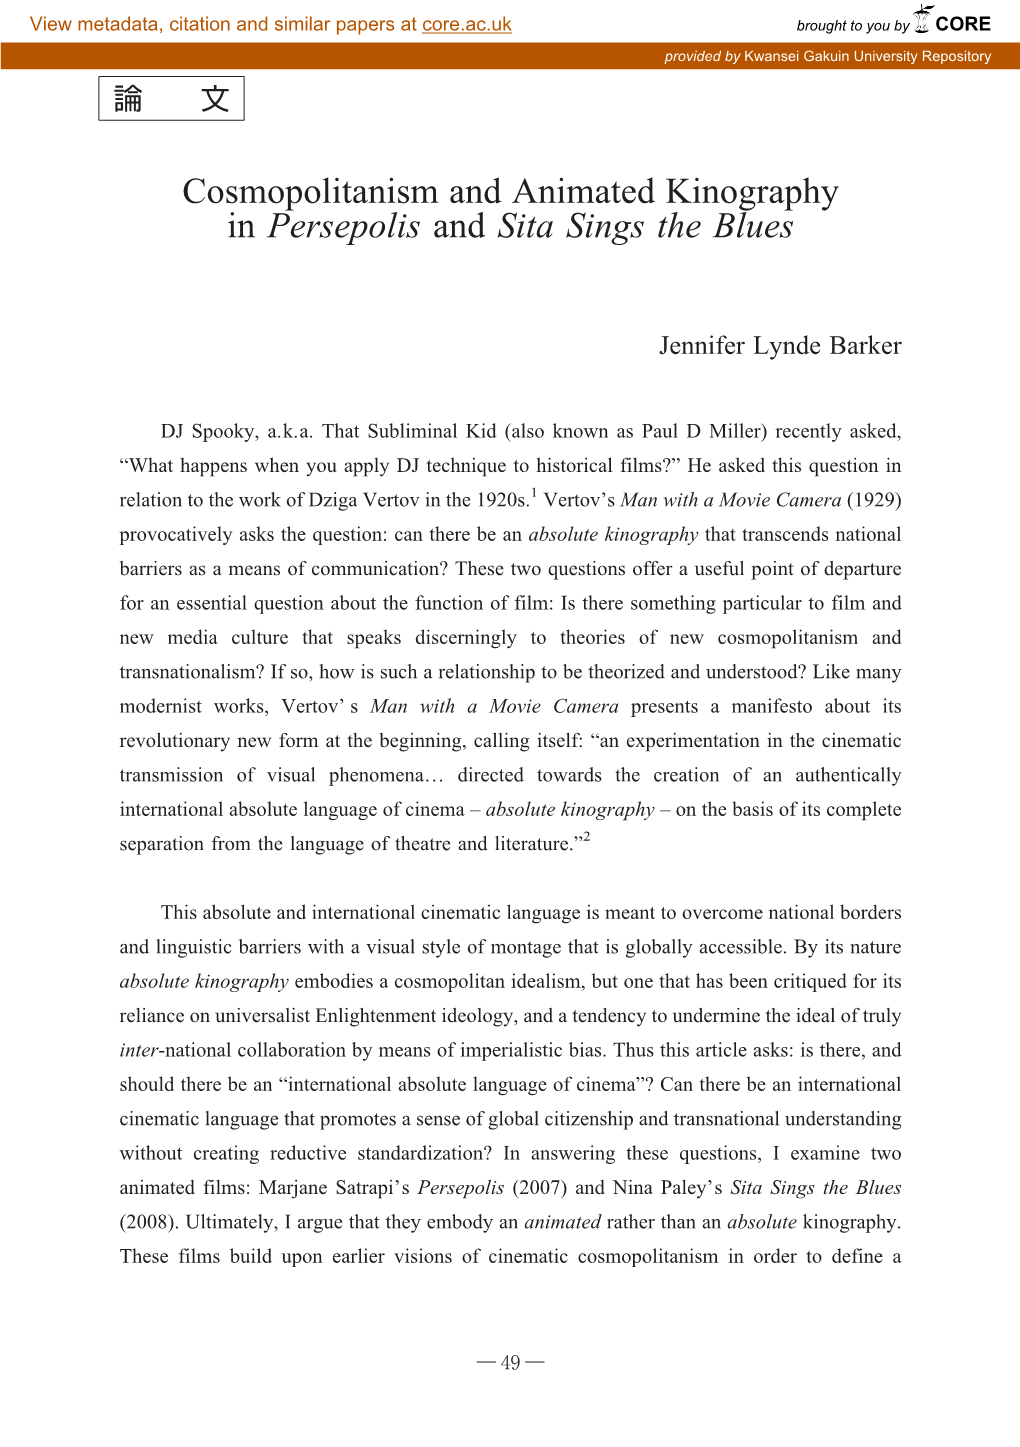 Cosmopolitanism and Animated Kinography in Persepolis and Sita Sings the Blues